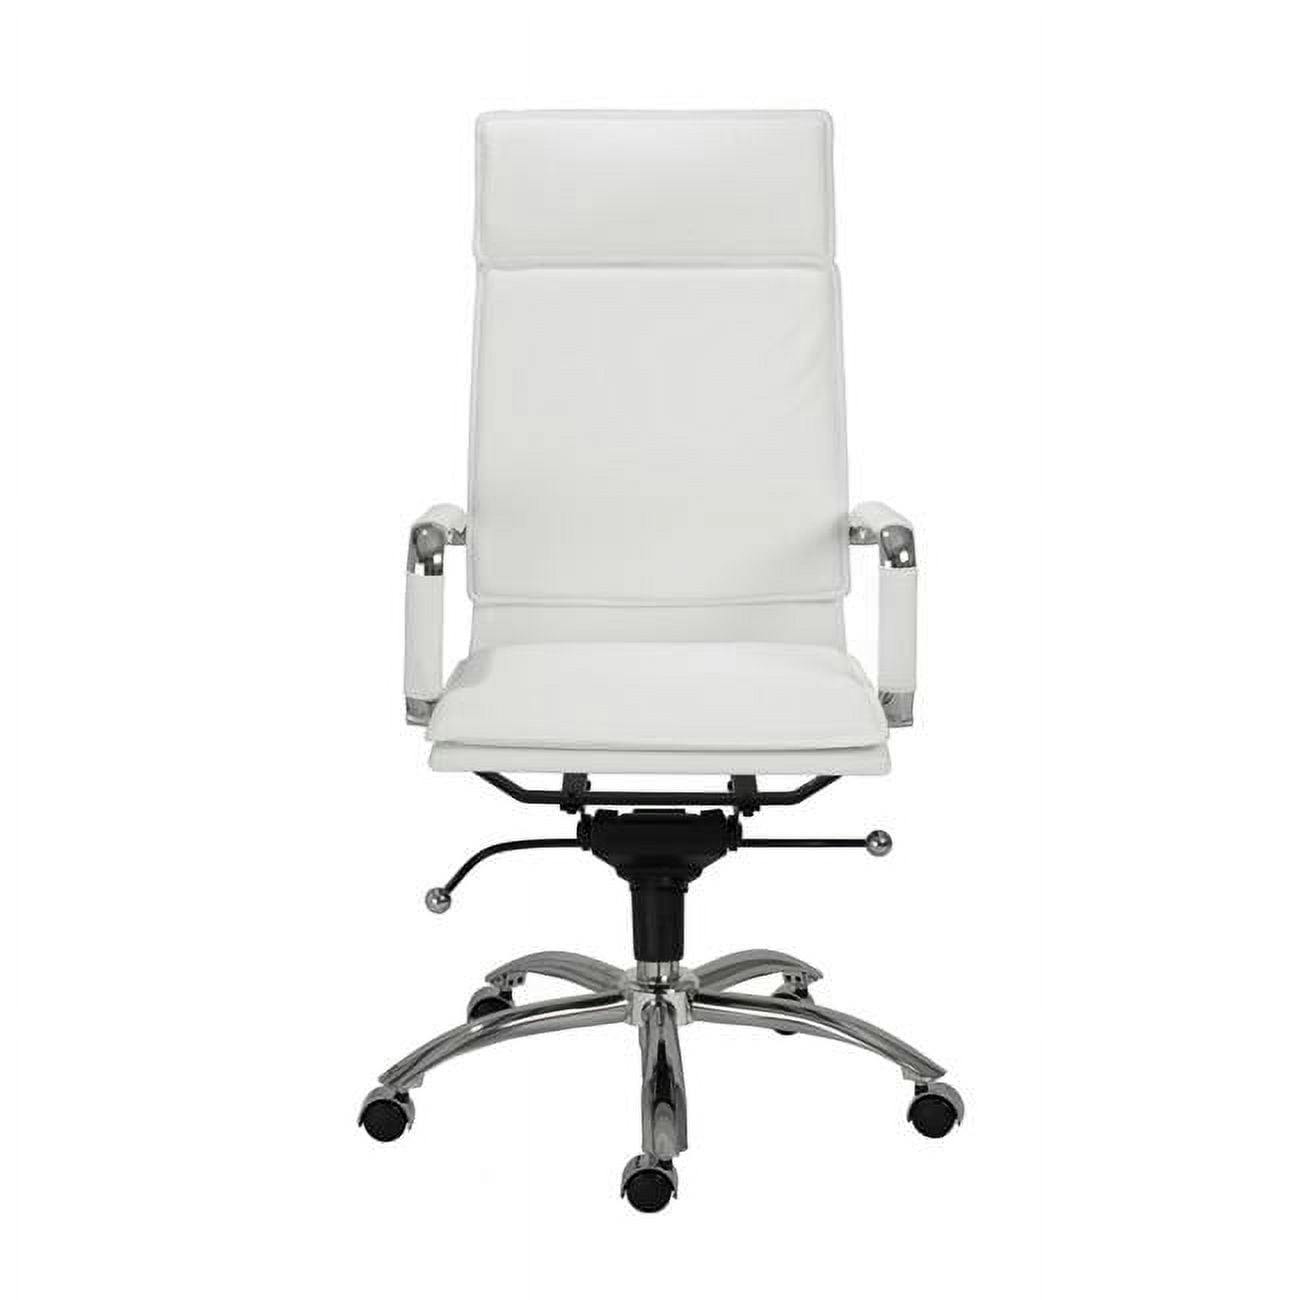 Amelia High-Back Swivel Office Chair with Chromed Steel Base